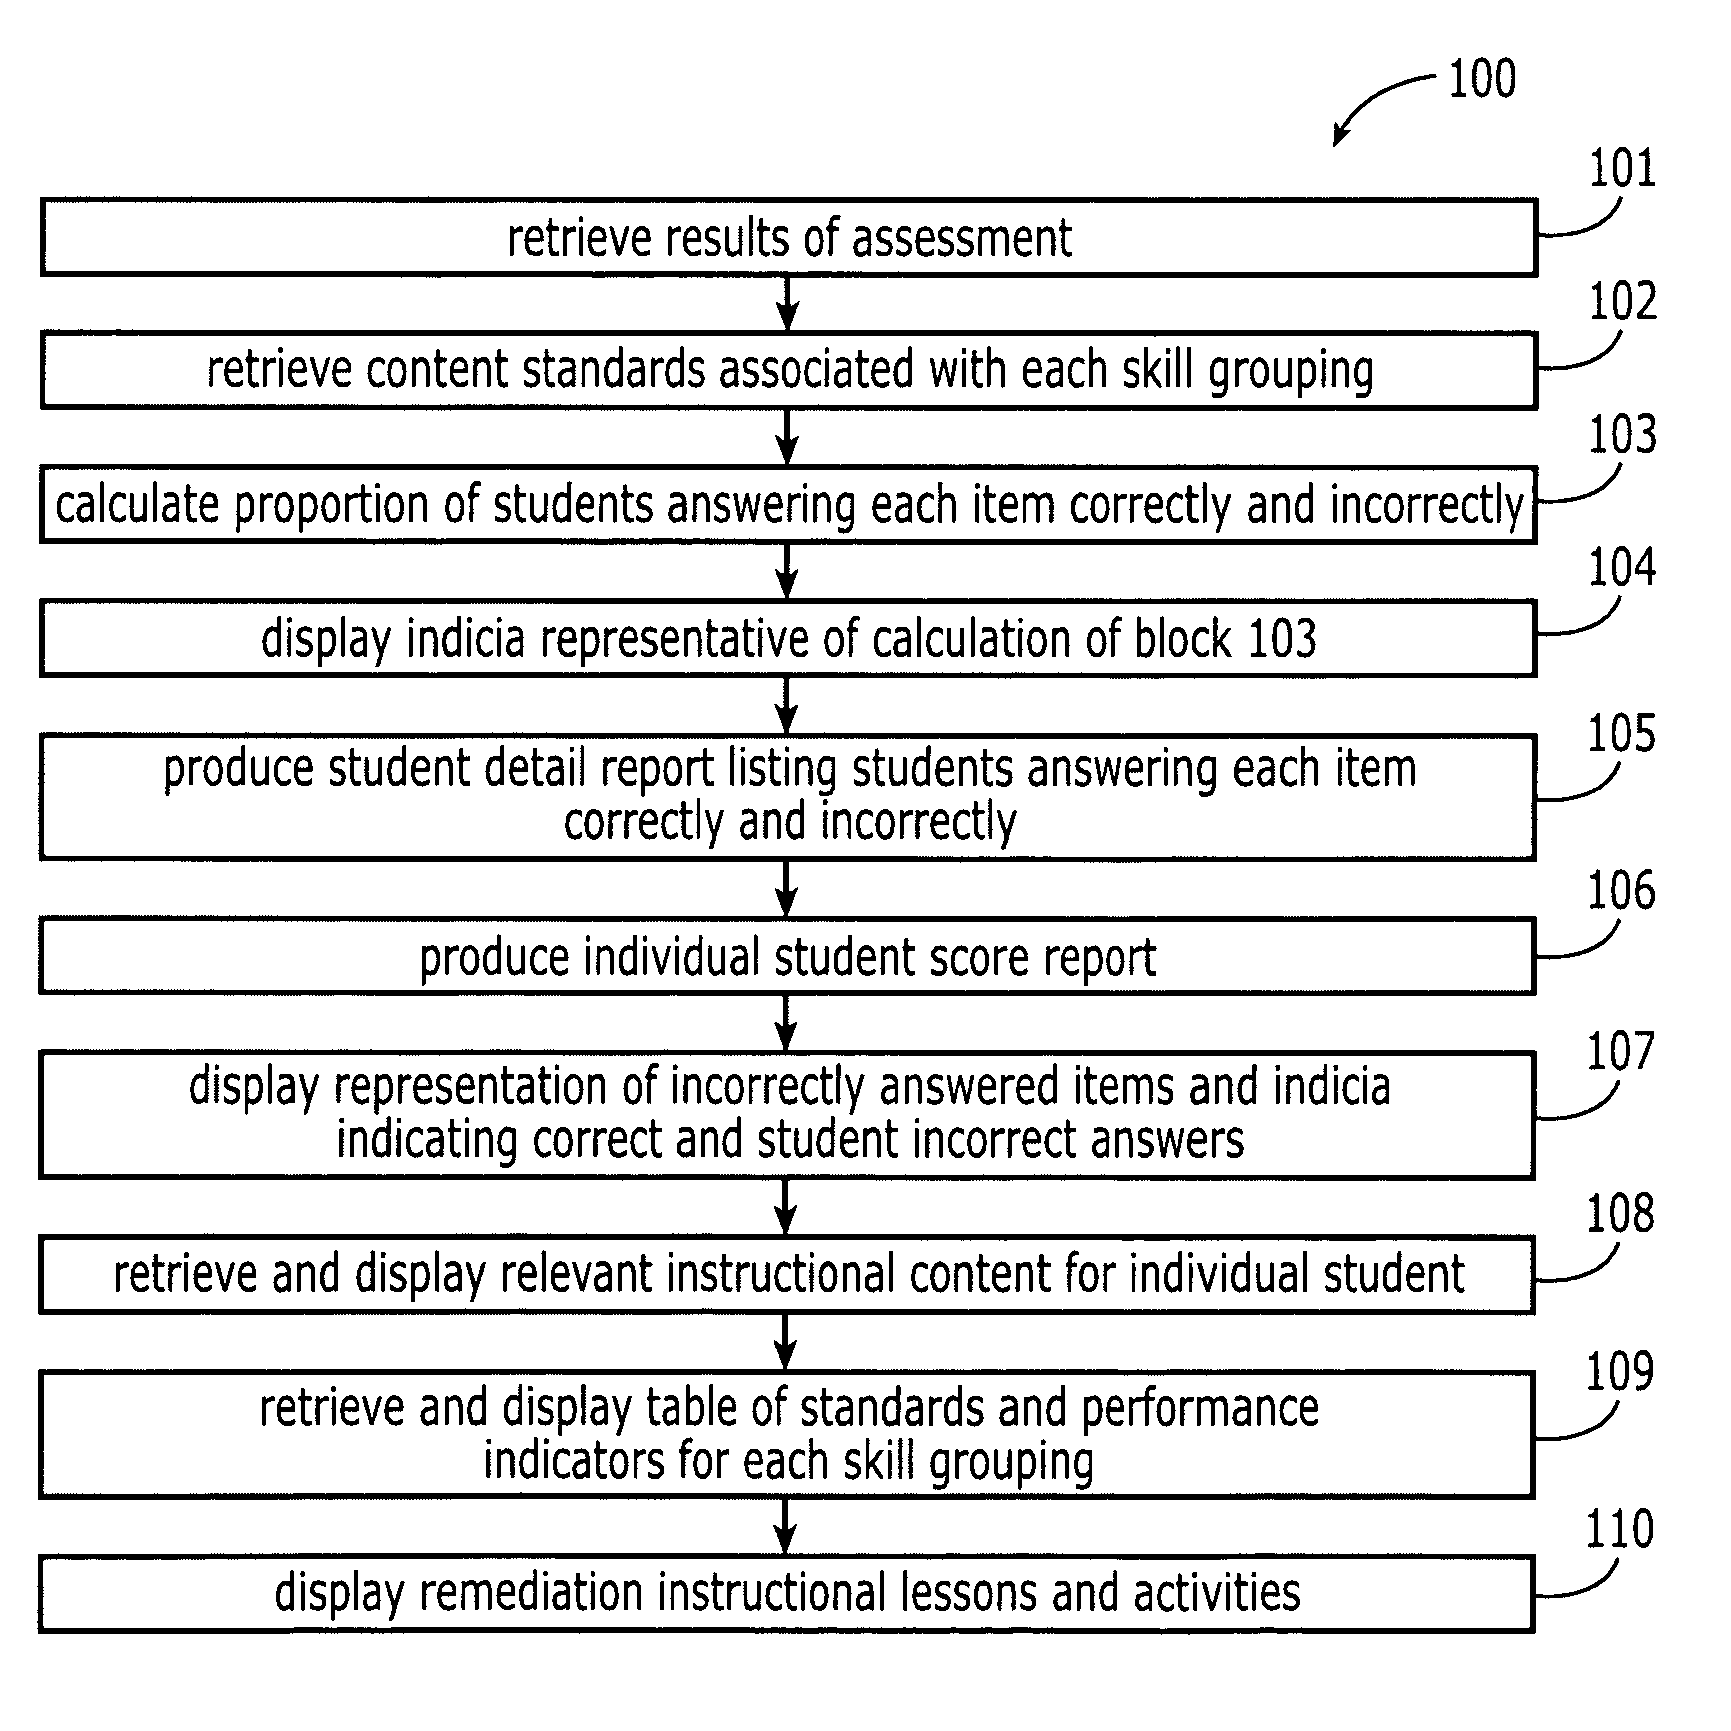 Electronic assessment summary and remedial action plan creation system and associated methods